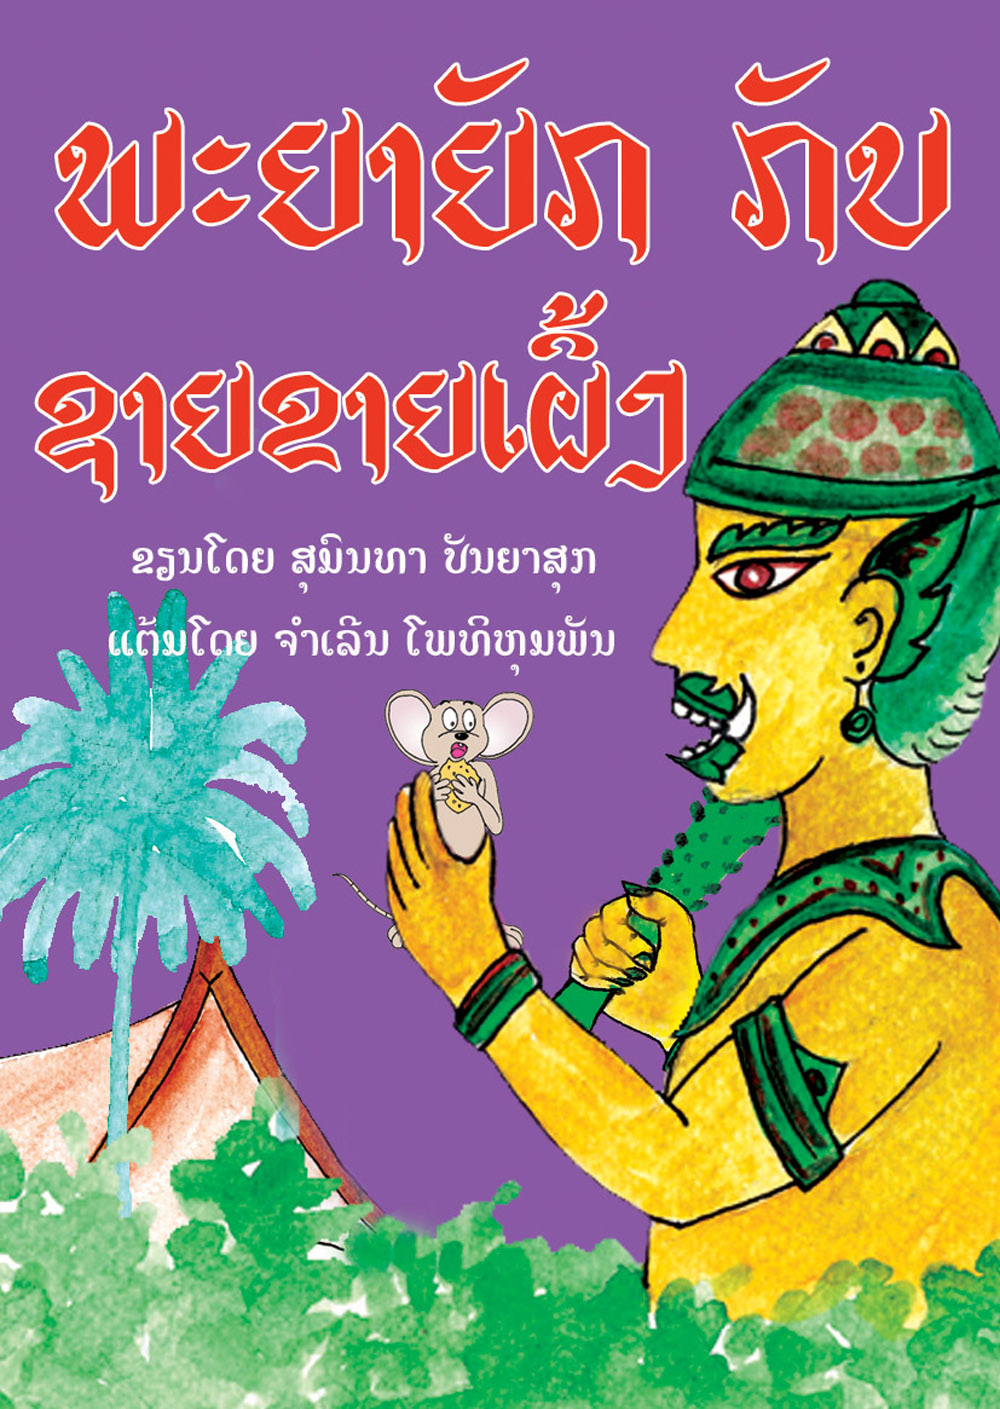 King Giant and the Honey Seller large book cover, published in Lao language